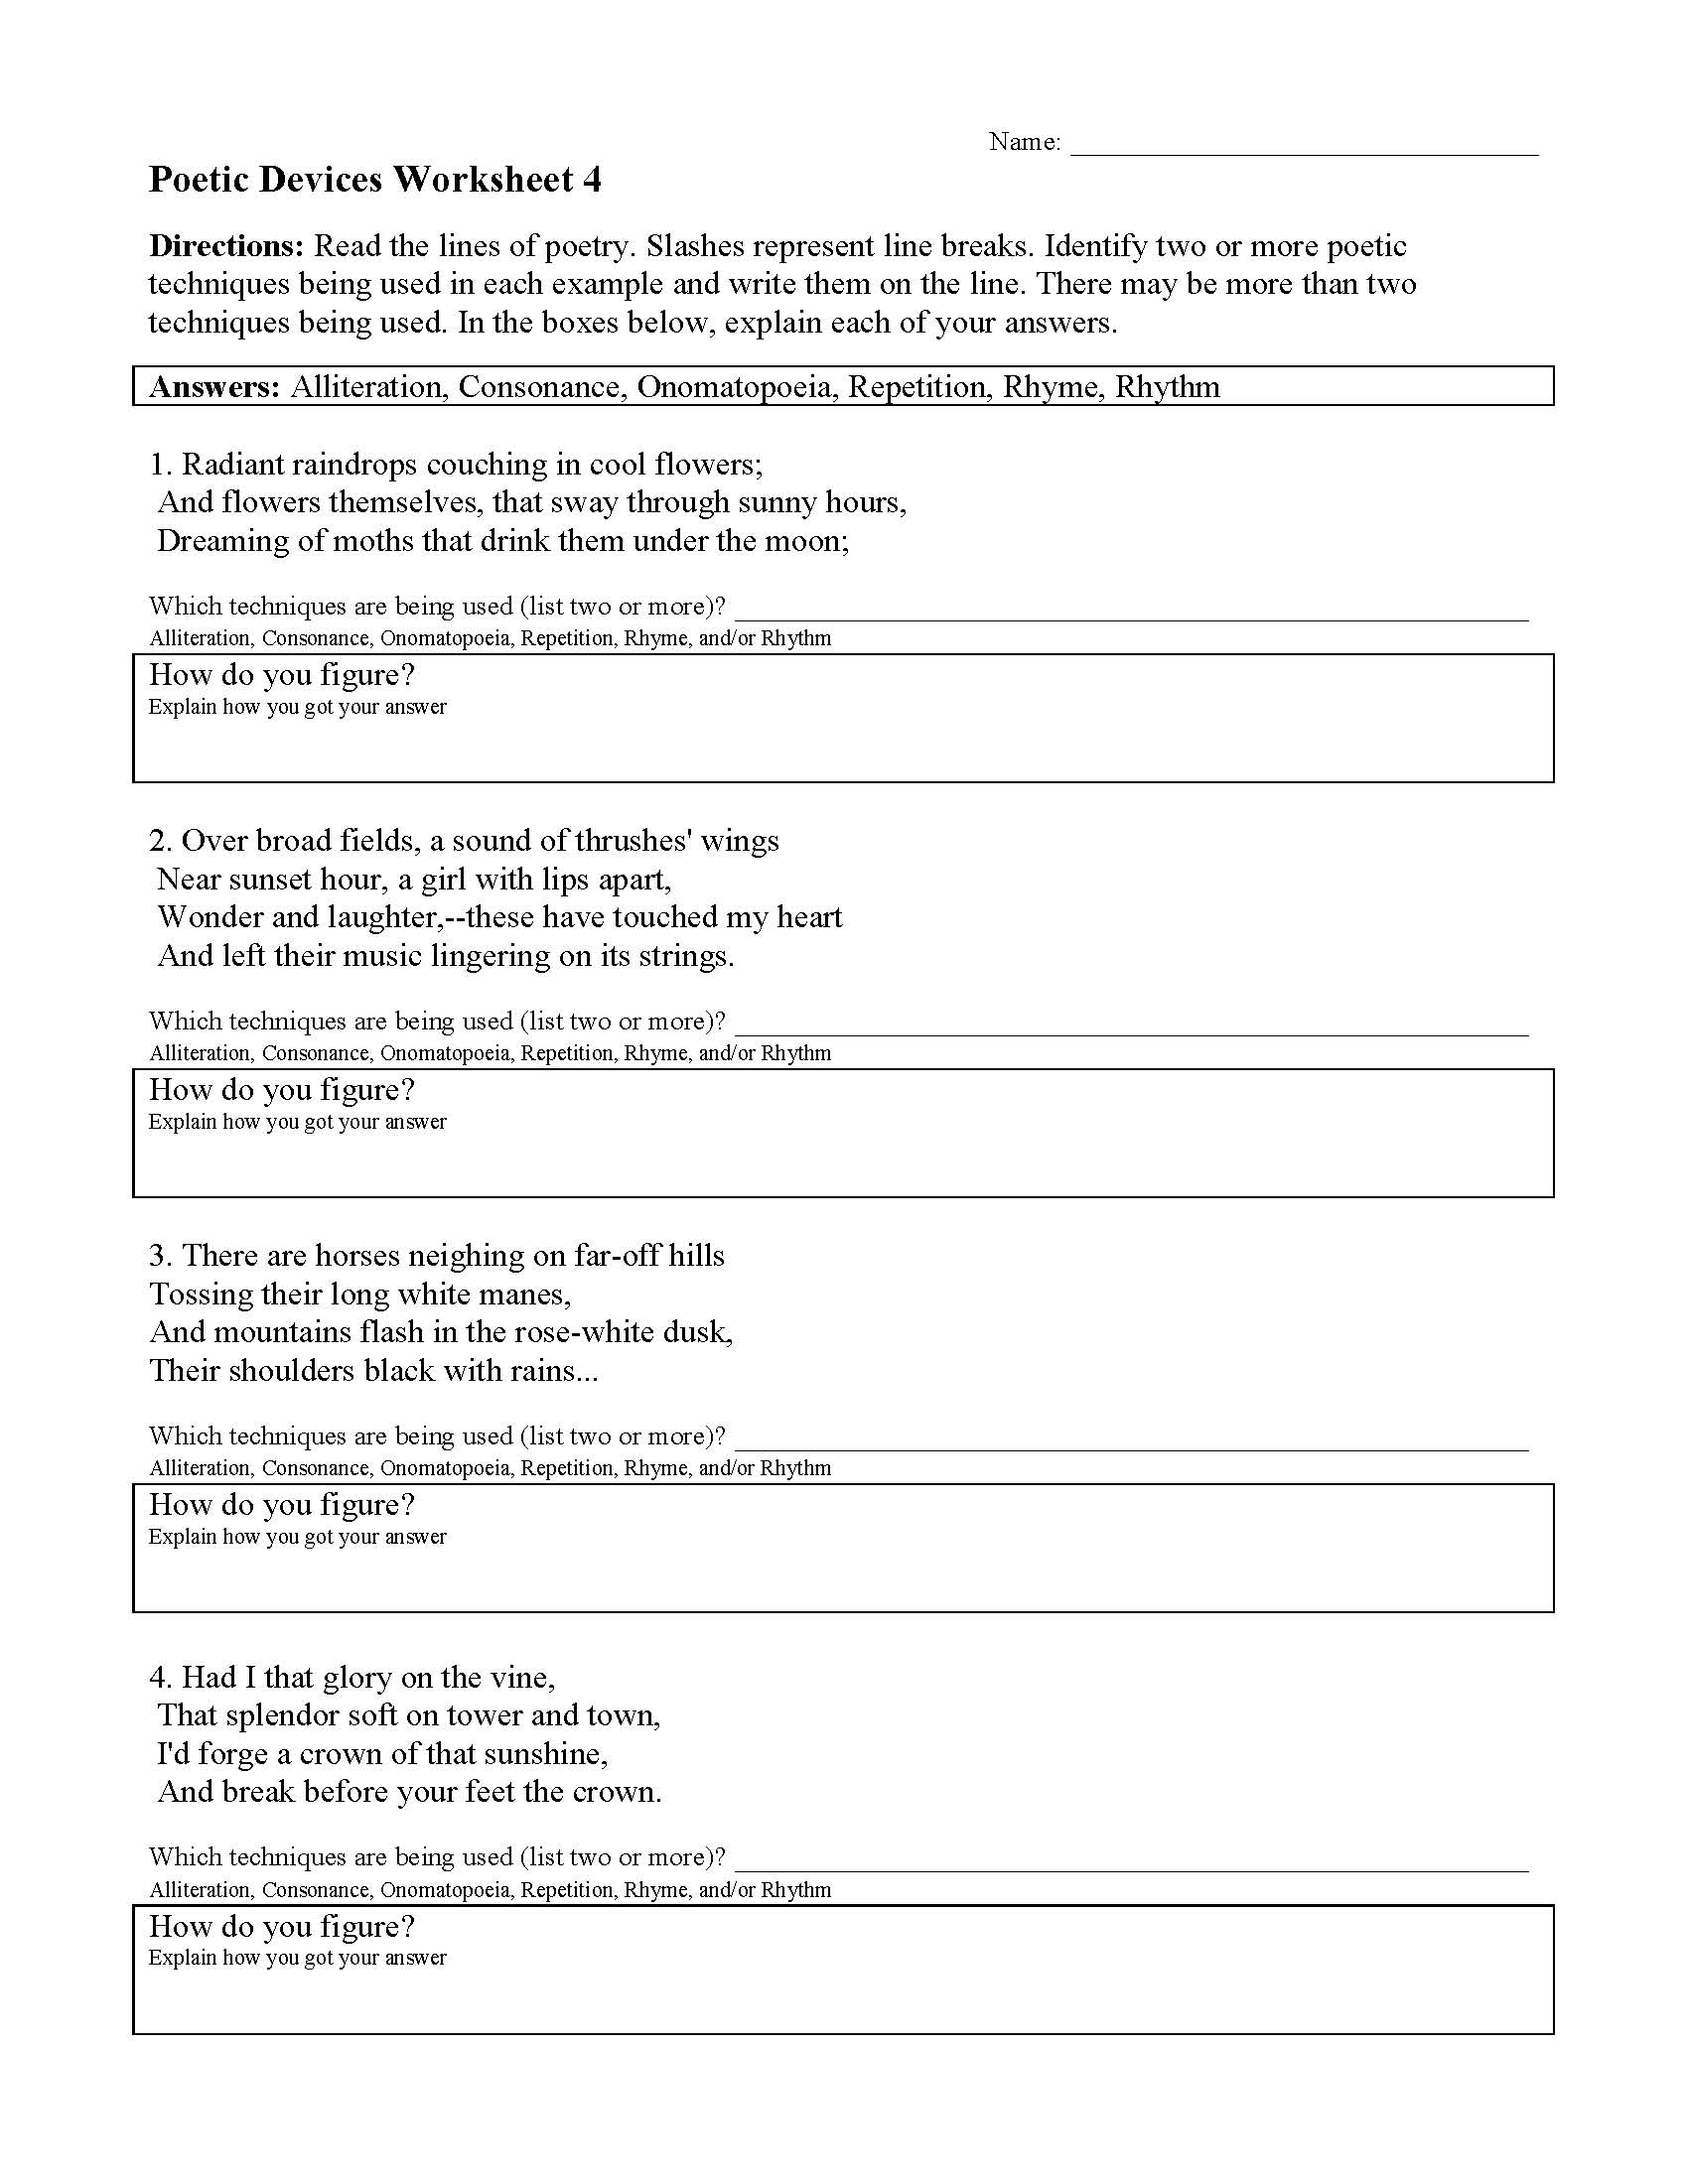 Poetic Devices Worksheets & Activities  Ereading Worksheets Intended For Poetic Devices Worksheet 1